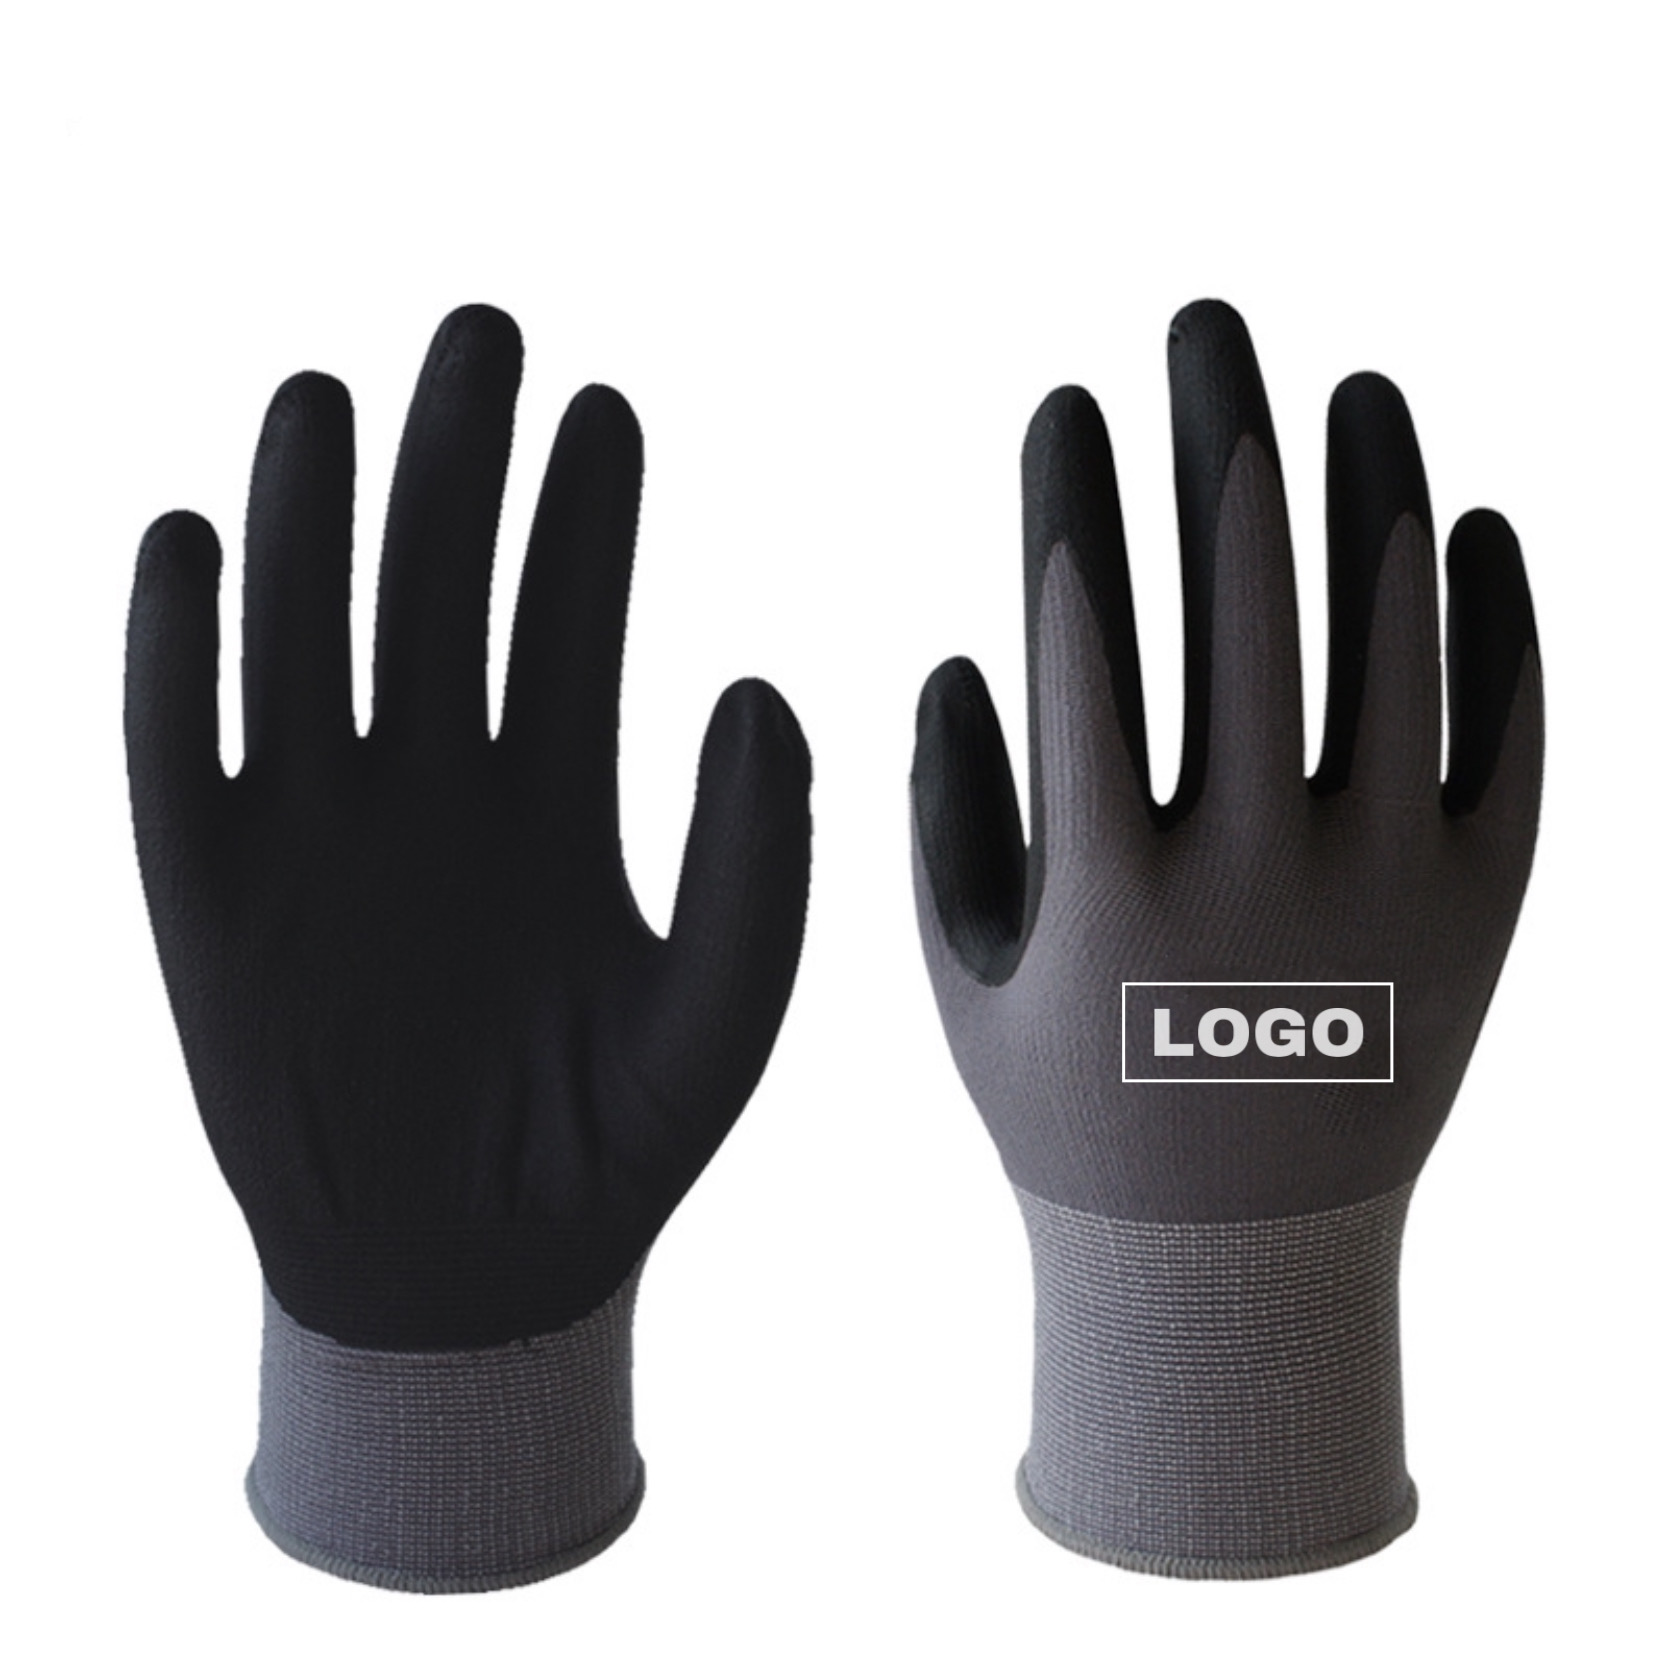 Safety Work Gloves MicroFoam Nitrile Coated Gloves for Construction Anti-Slip Oil and Abrasion Resistant Labor Protective Working Gloves